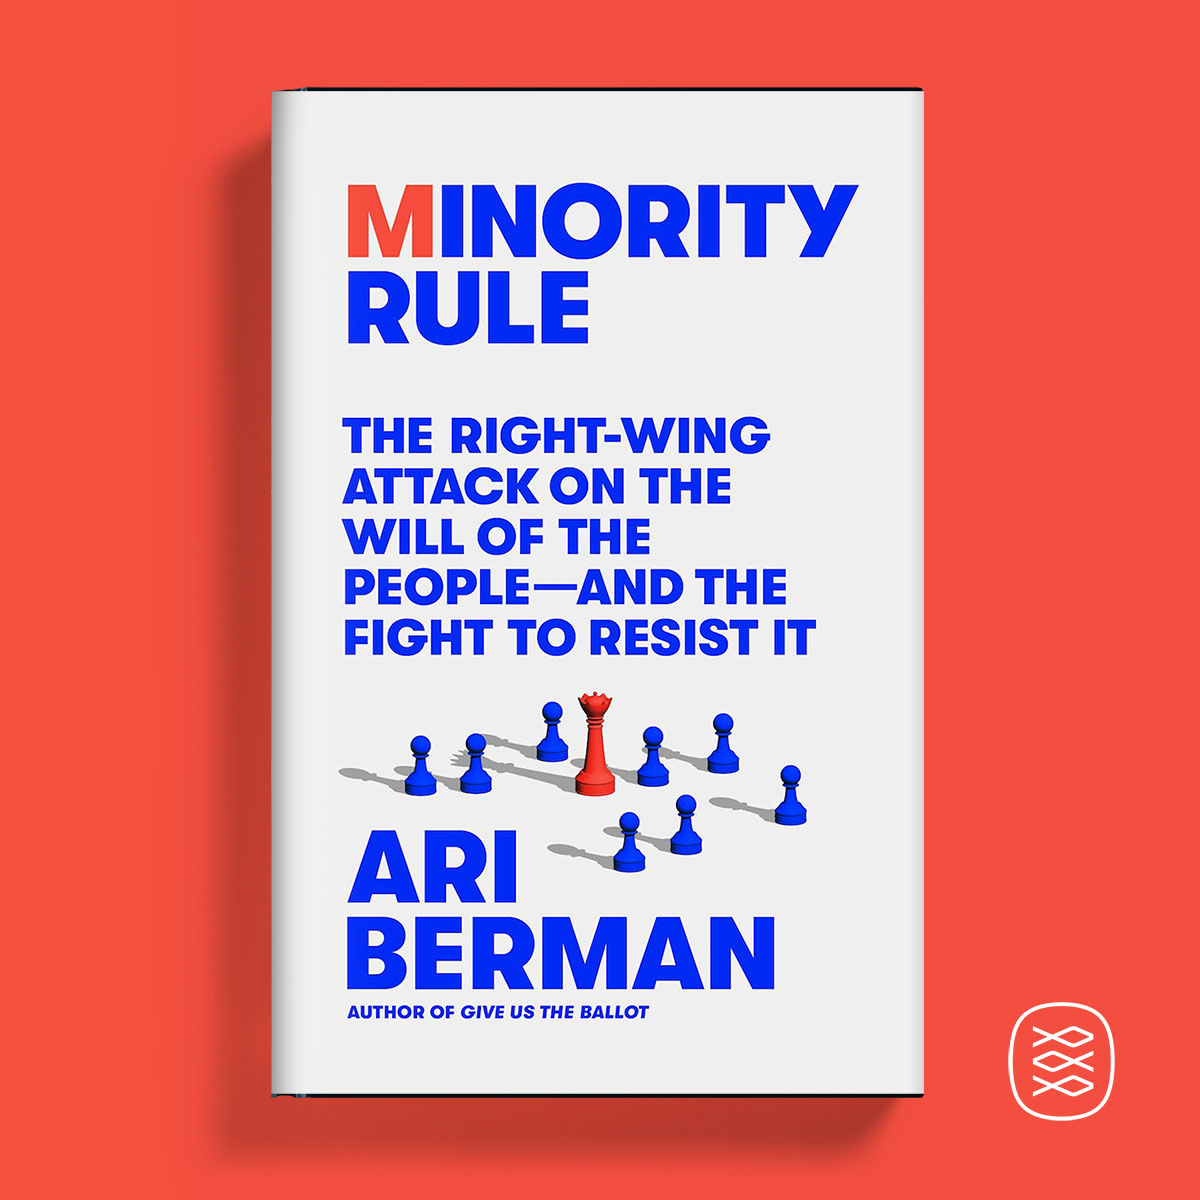 It's pub day for my new book MINORITY RULE! It tells most important story of our time: how reactionary conservative minority is trying to nullify will of majority & how we can fight back. Please read, this is most important thing I’ve ever done a.co/d/i4zp3FP @fsgbooks